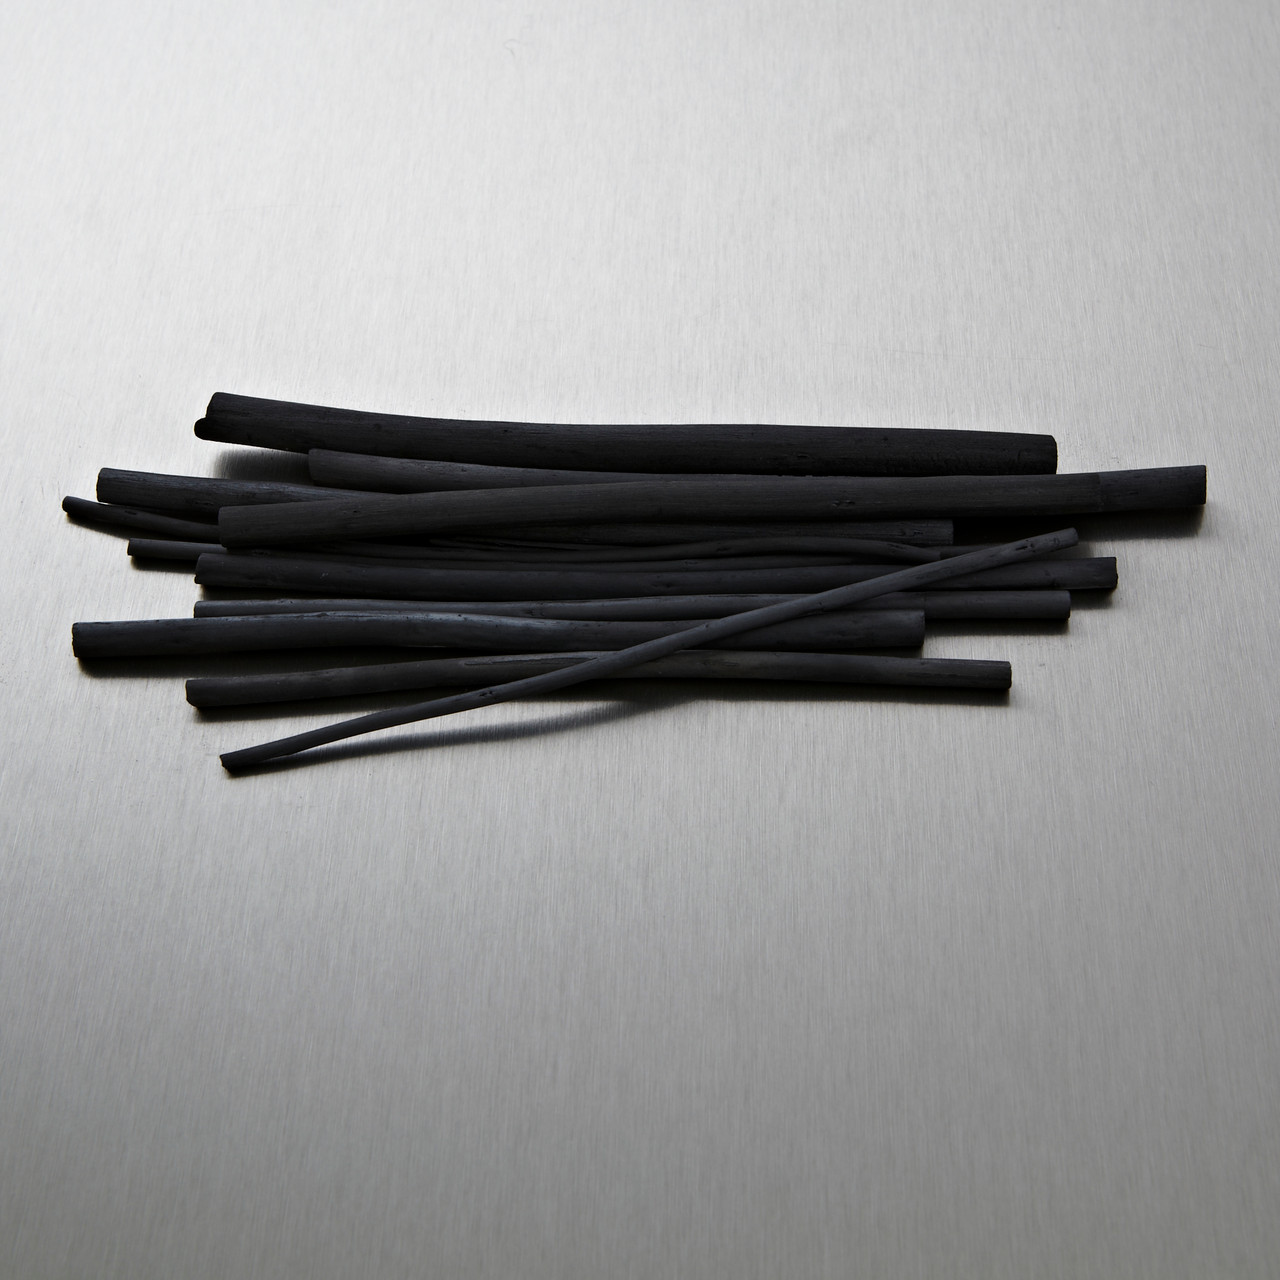 Daler Rowney Simply Willow Charcoal Set of 12